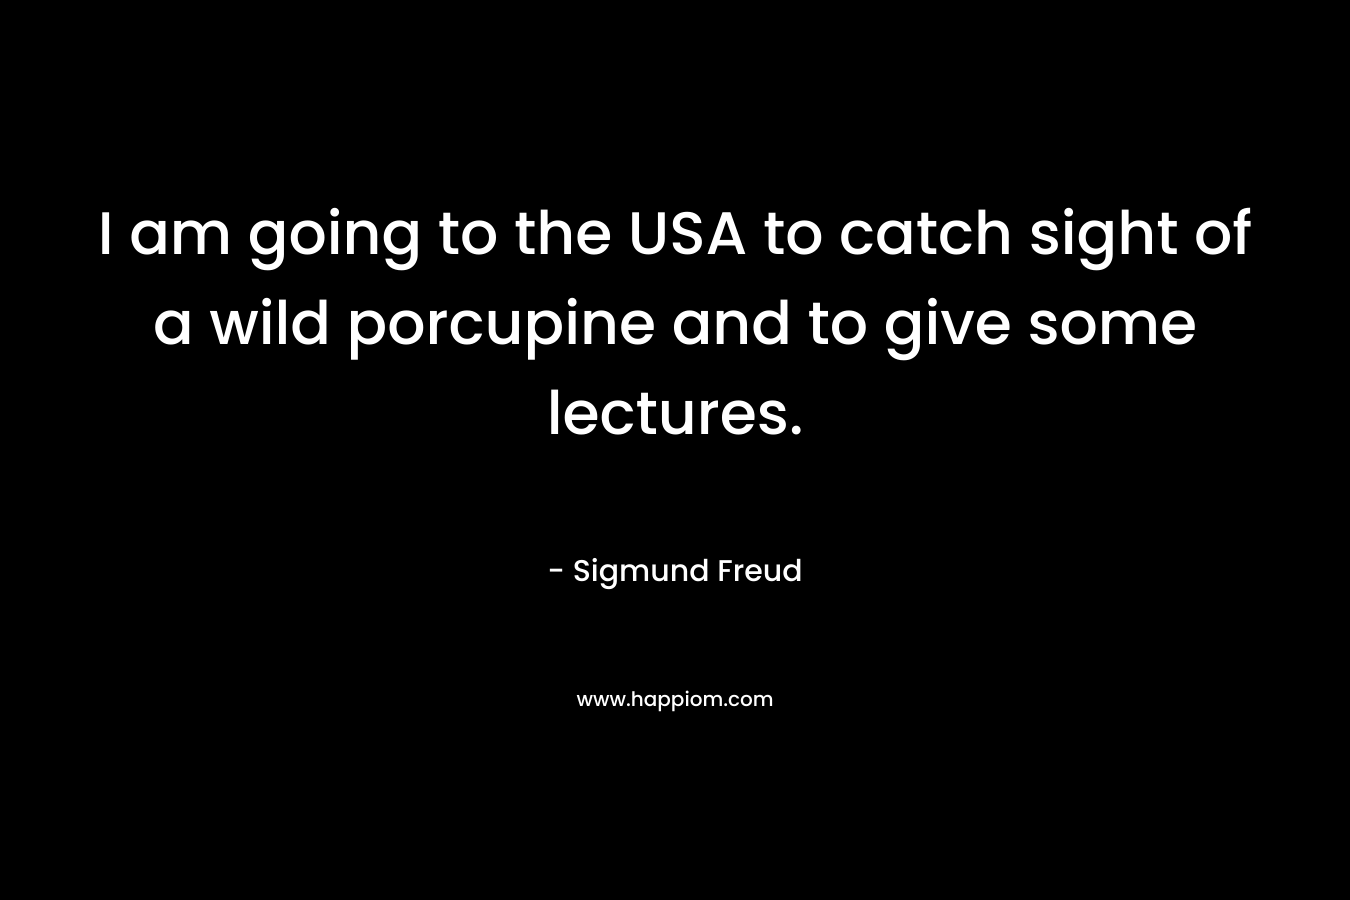 I am going to the USA to catch sight of a wild porcupine and to give some lectures.